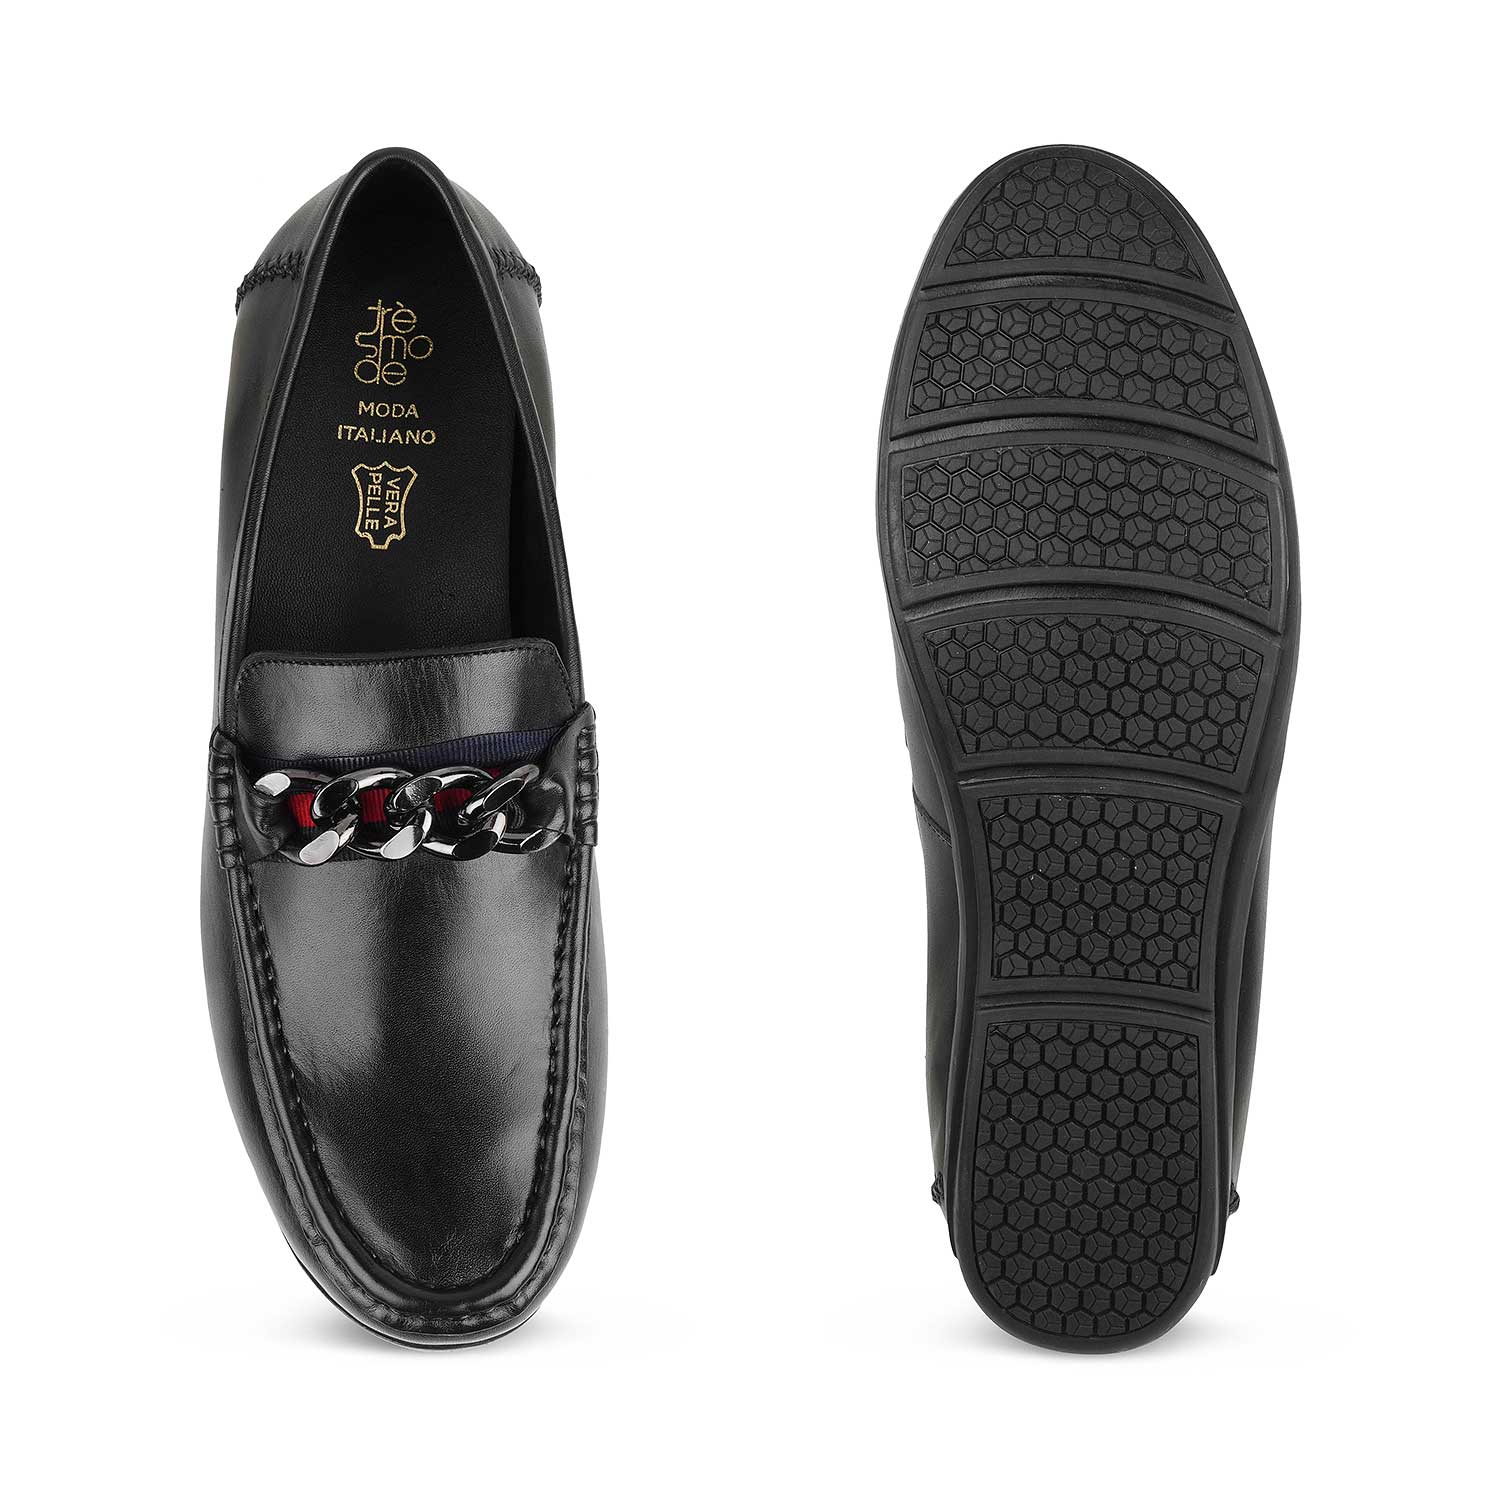 The Csteal Black Men's Leather Driving Loafers Tresmode